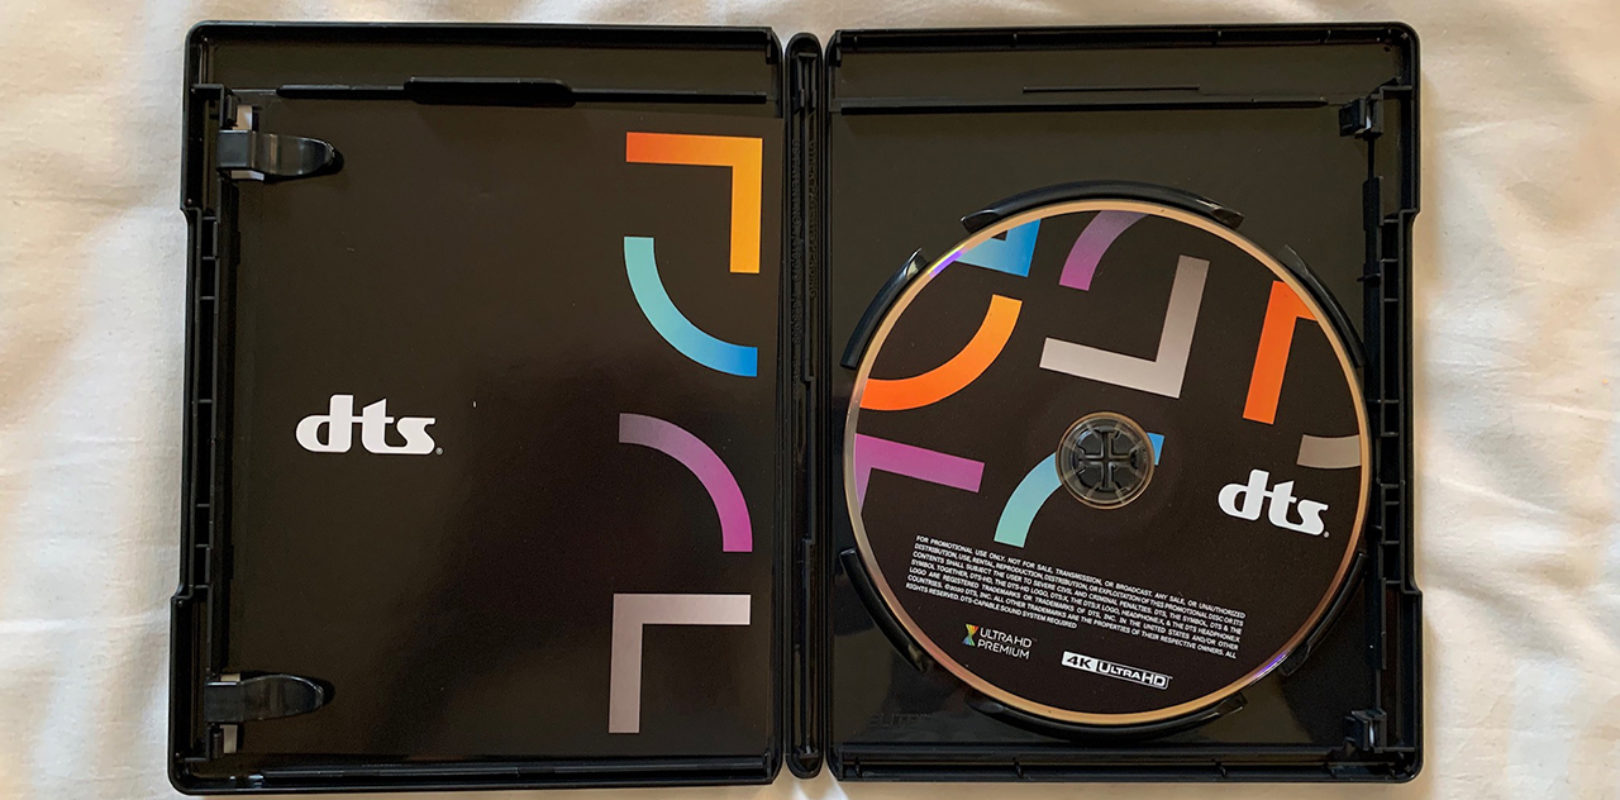 dolby vision demo disc